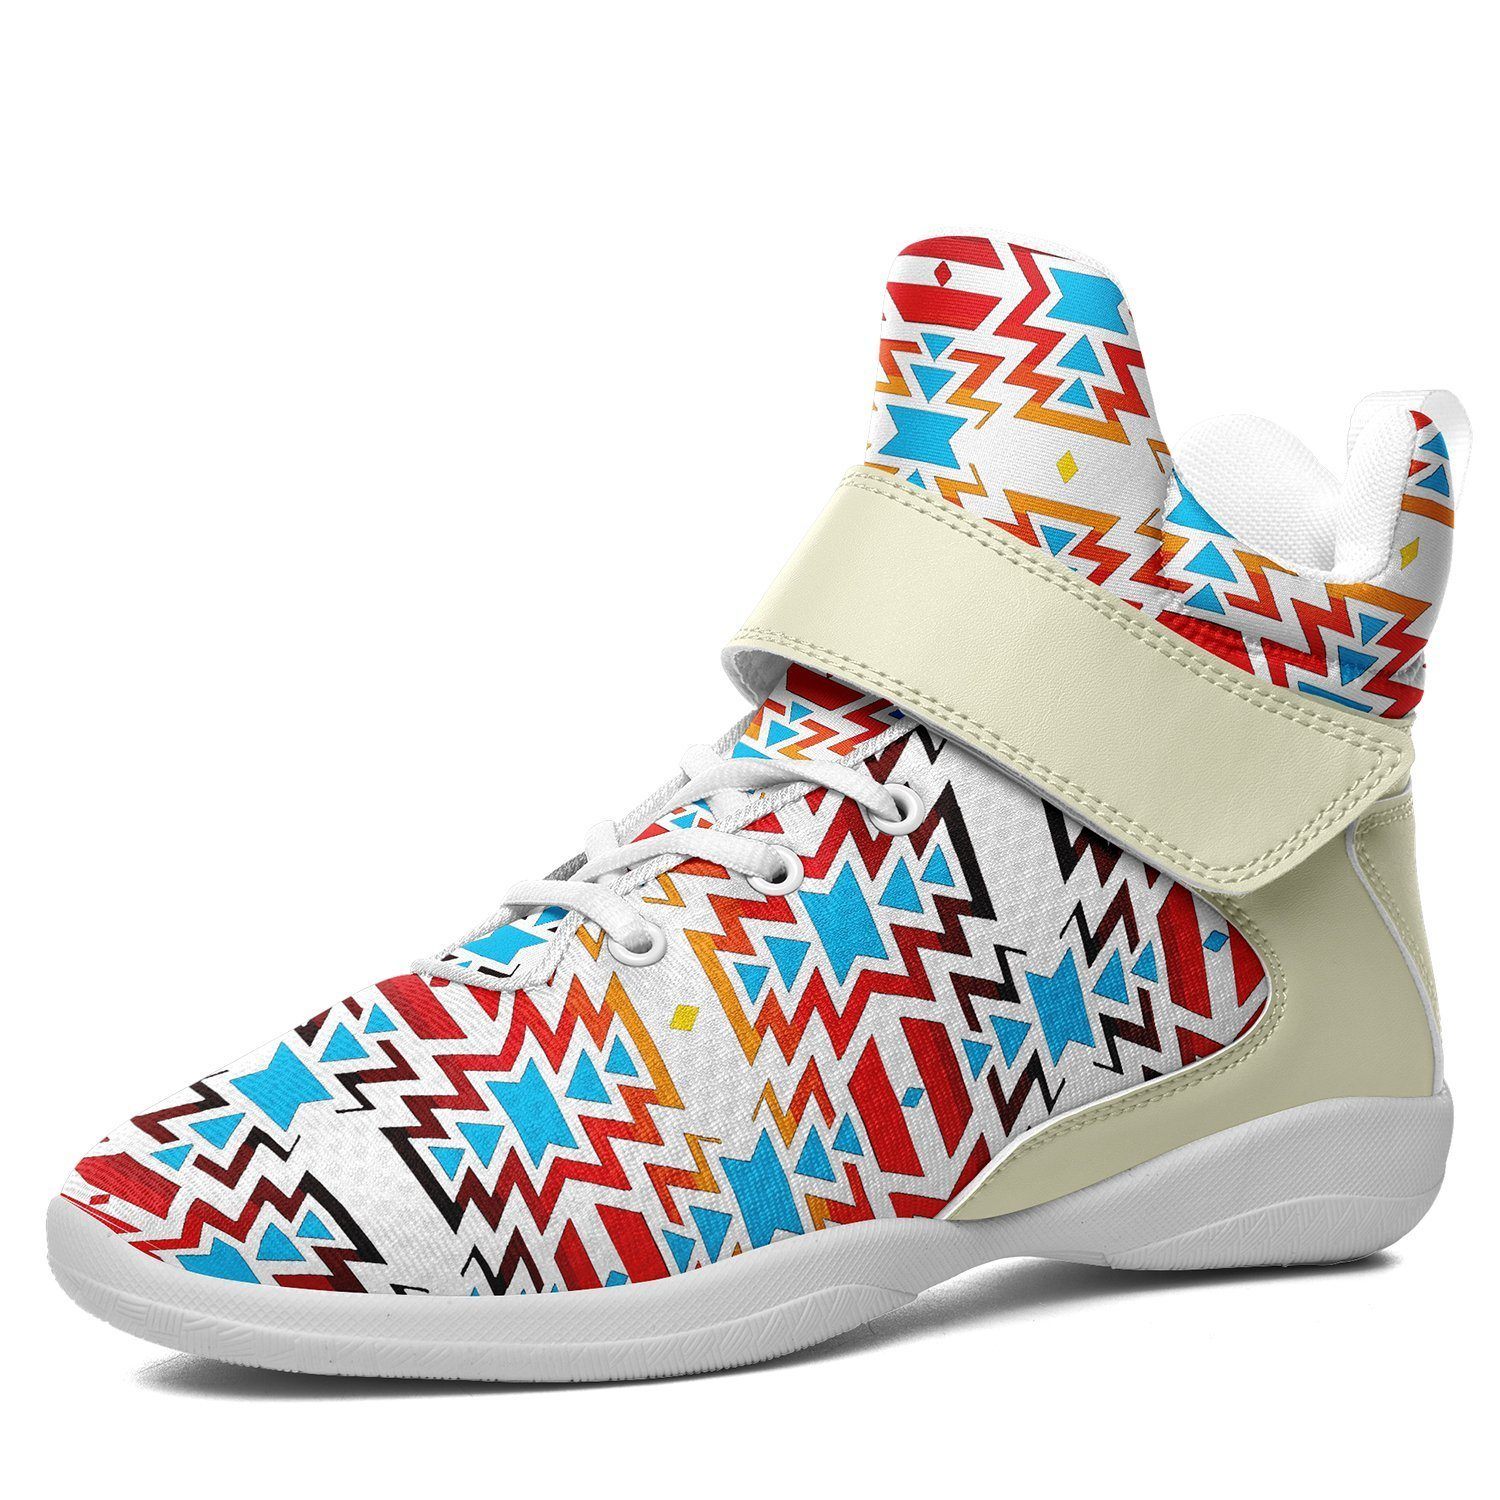 Fire Colors and Sky Ipottaa Basketball / Sport High Top Shoes - White Sole 49 Dzine US Men 7 / EUR 40 White Sole with Cream Strap 